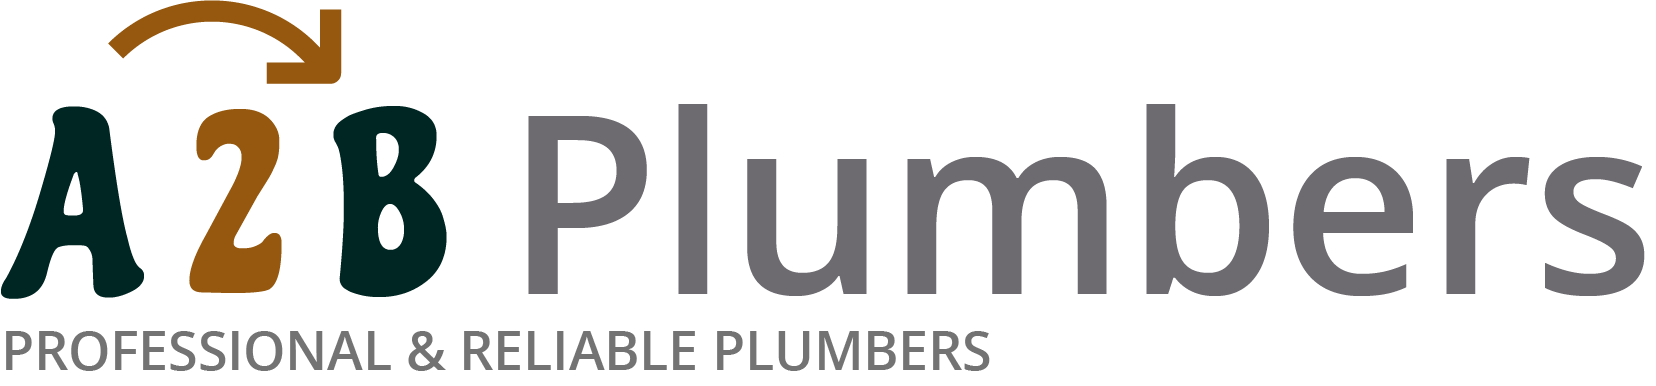 If you need a boiler installed, a radiator repaired or a leaking tap fixed, call us now - we provide services for properties in Tulse Hill and the local area.